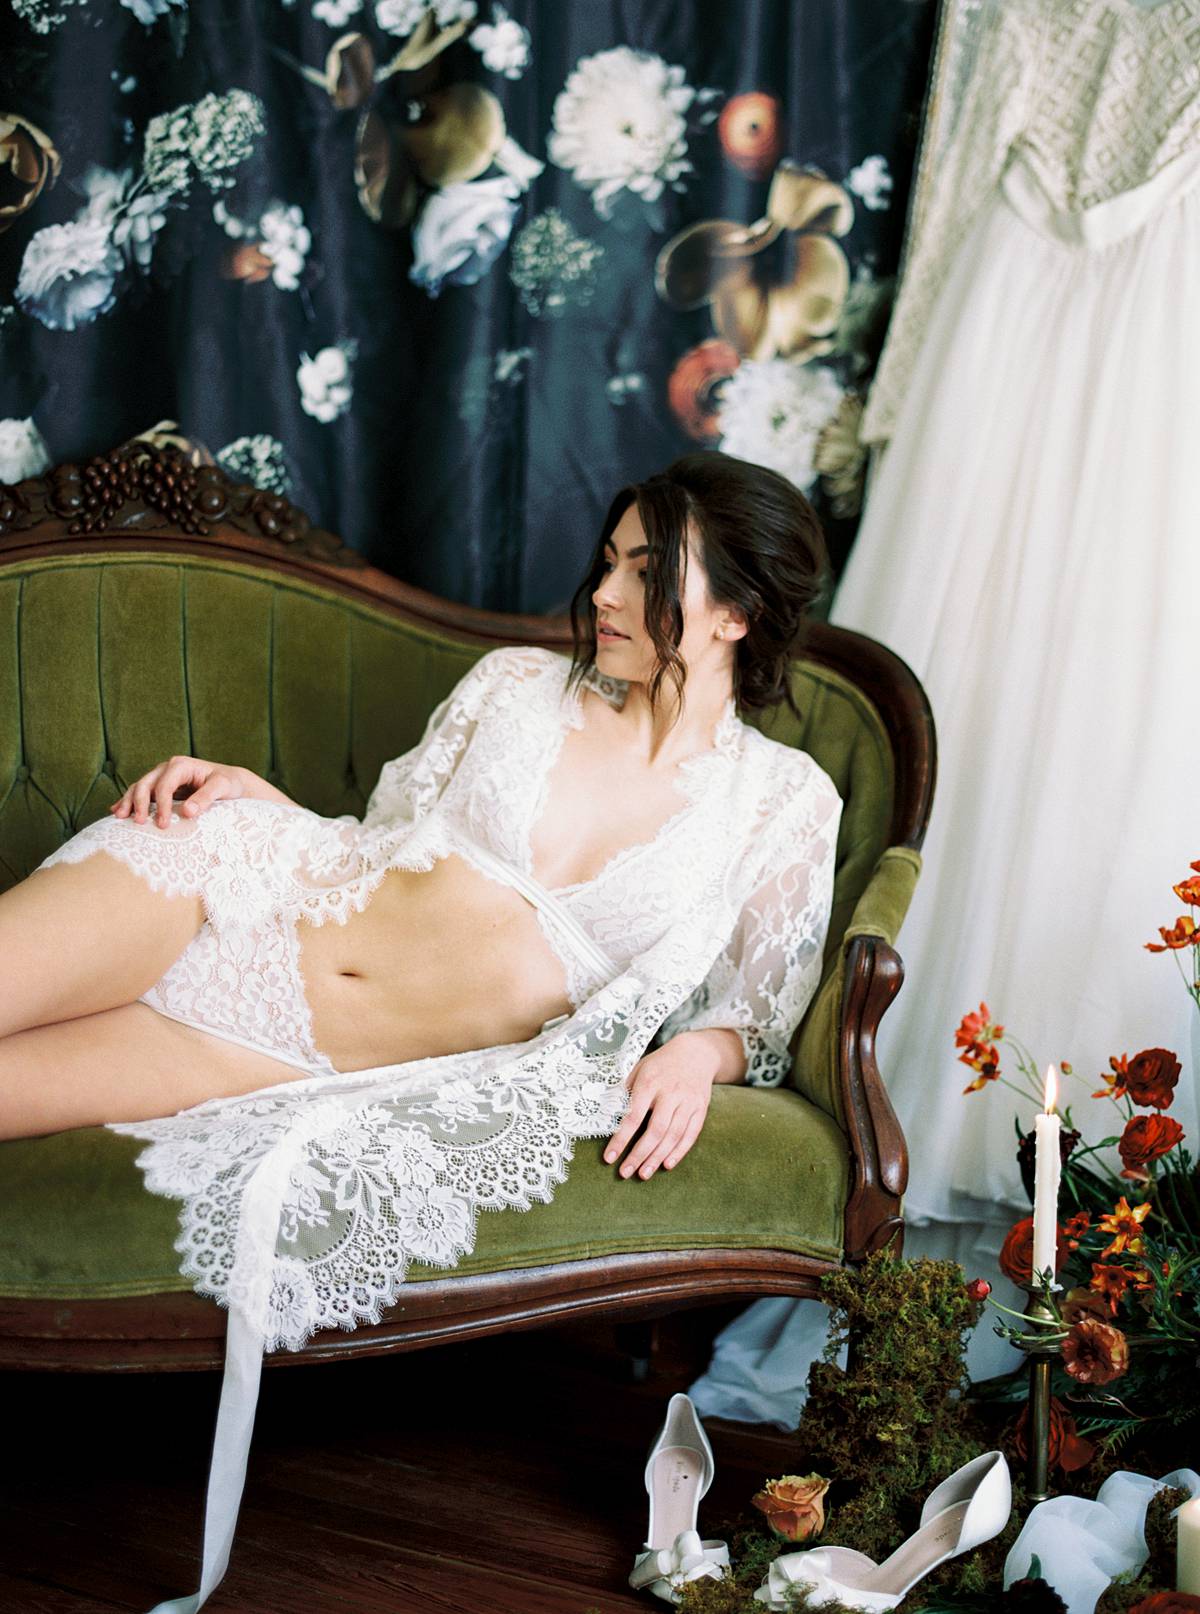 styled charleston bridal boudoir session at wingate plantation in south carolina with lingerie and lace robe and flowers